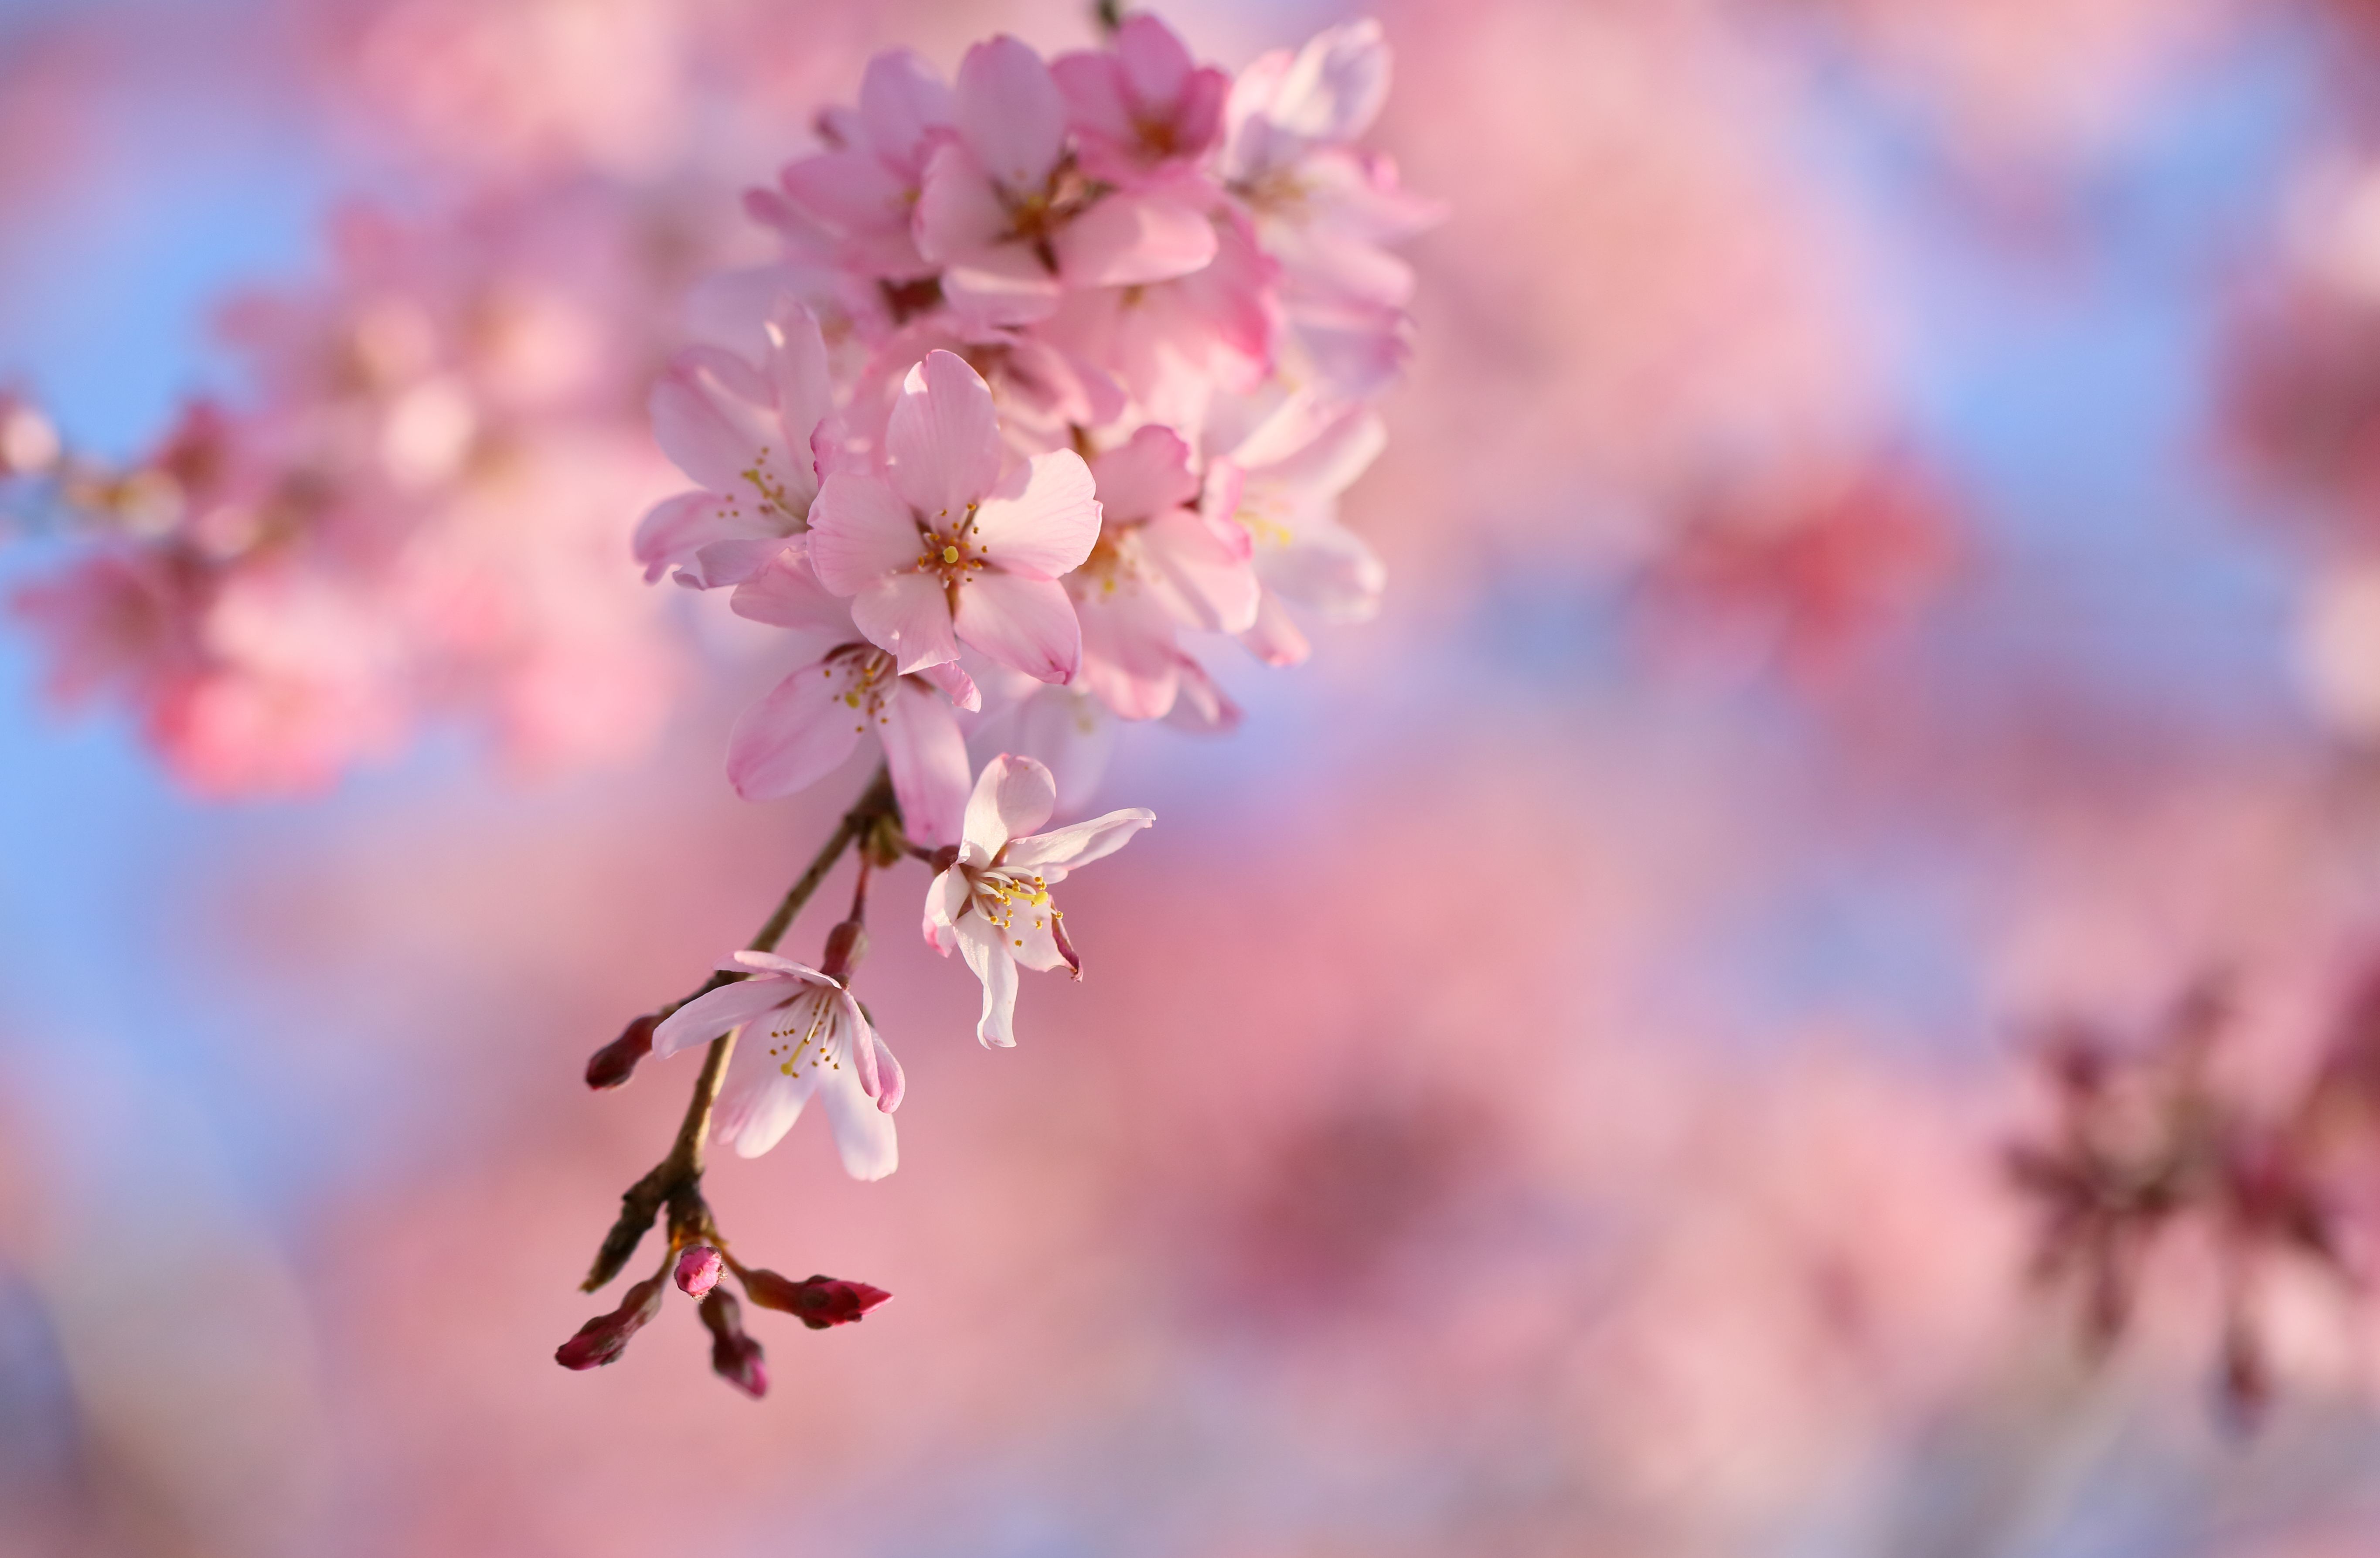 Drooping cherry blossoms Computer Wallpapers, Desktop Backgrounds ...